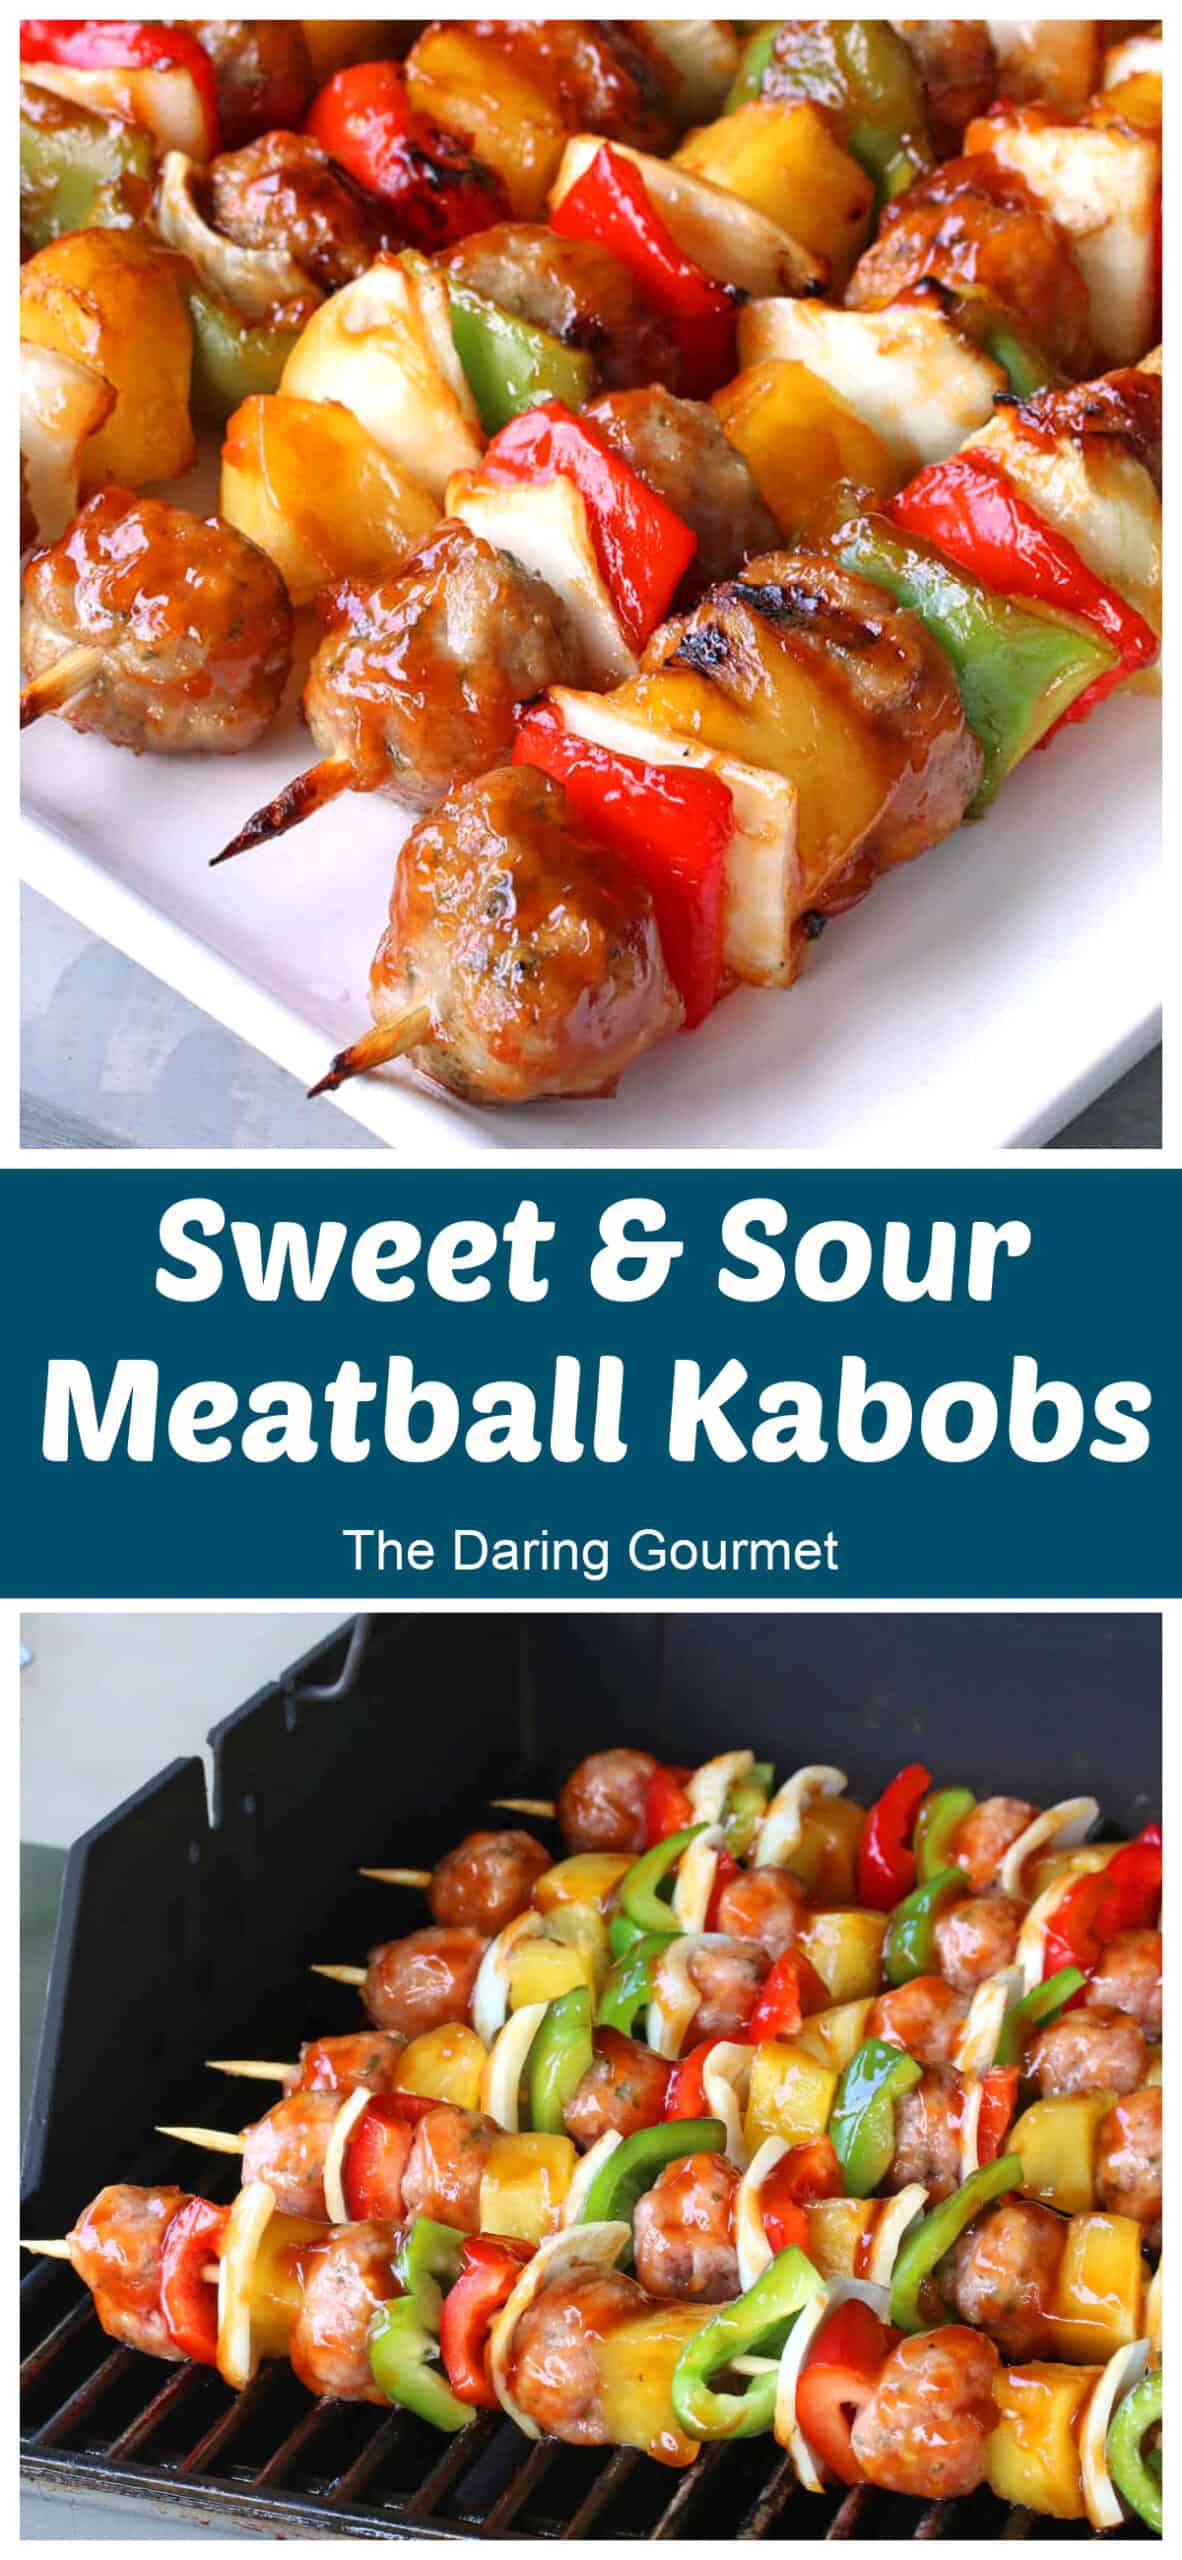 sweet and sour meatball kabobs recipe healthy easy from scratch chicken pork beef turkey veal beef